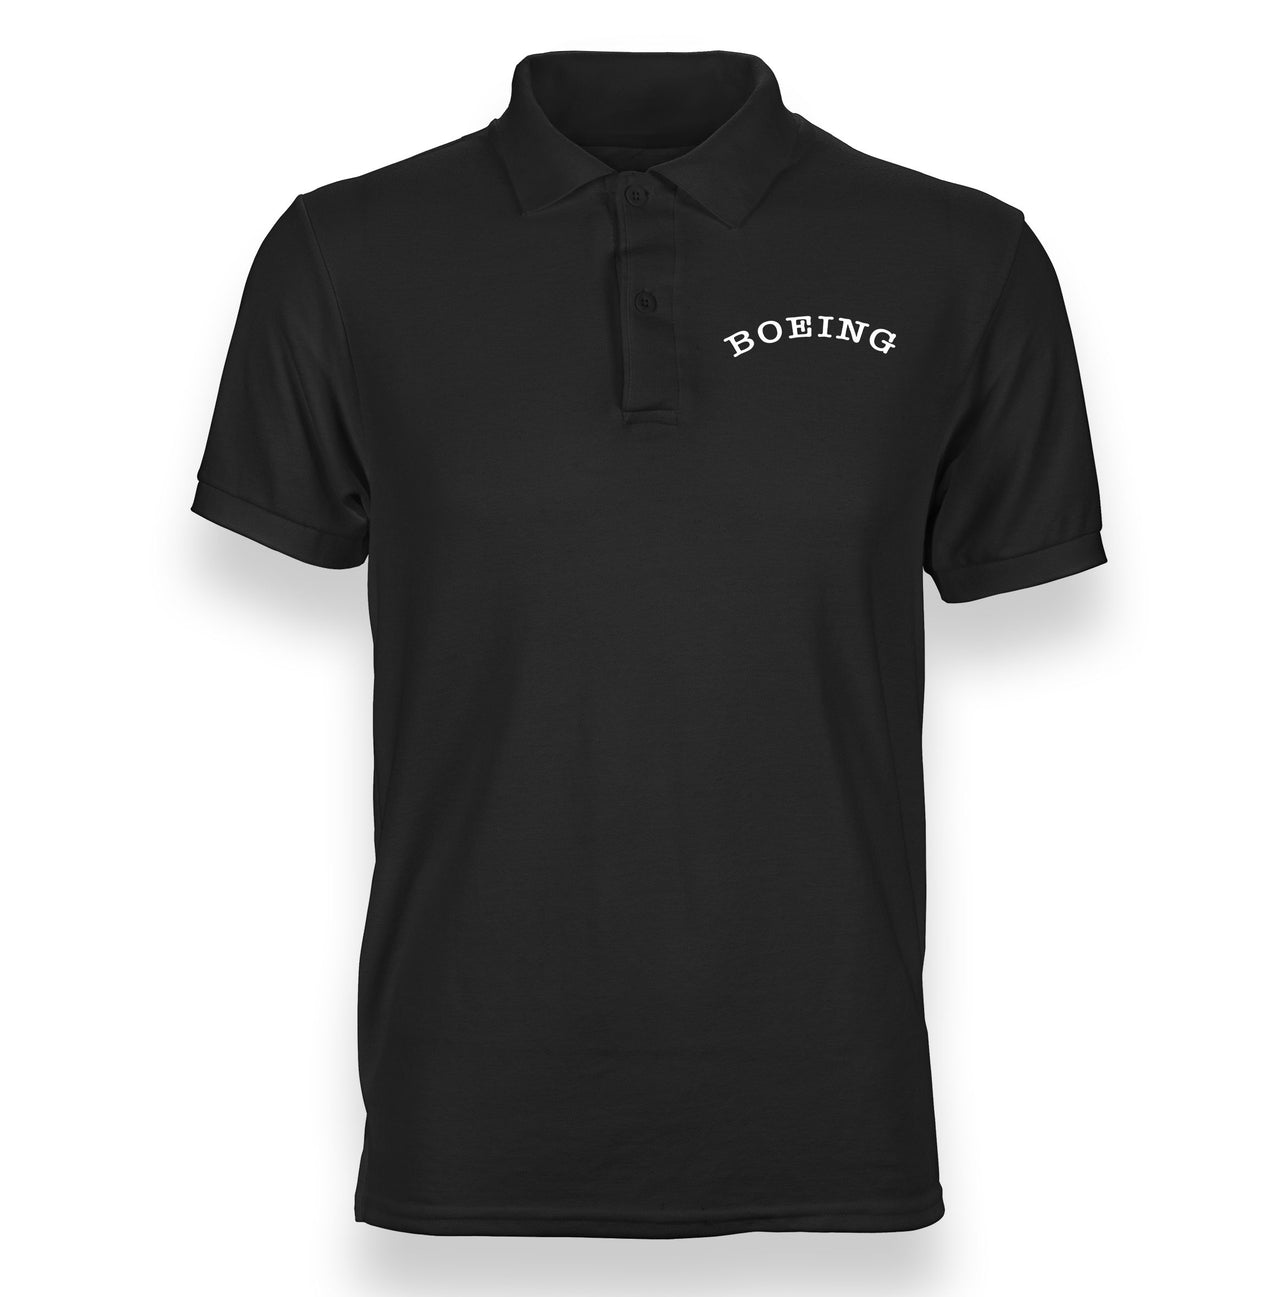 Special BOEING Text Designed Polo T-Shirts